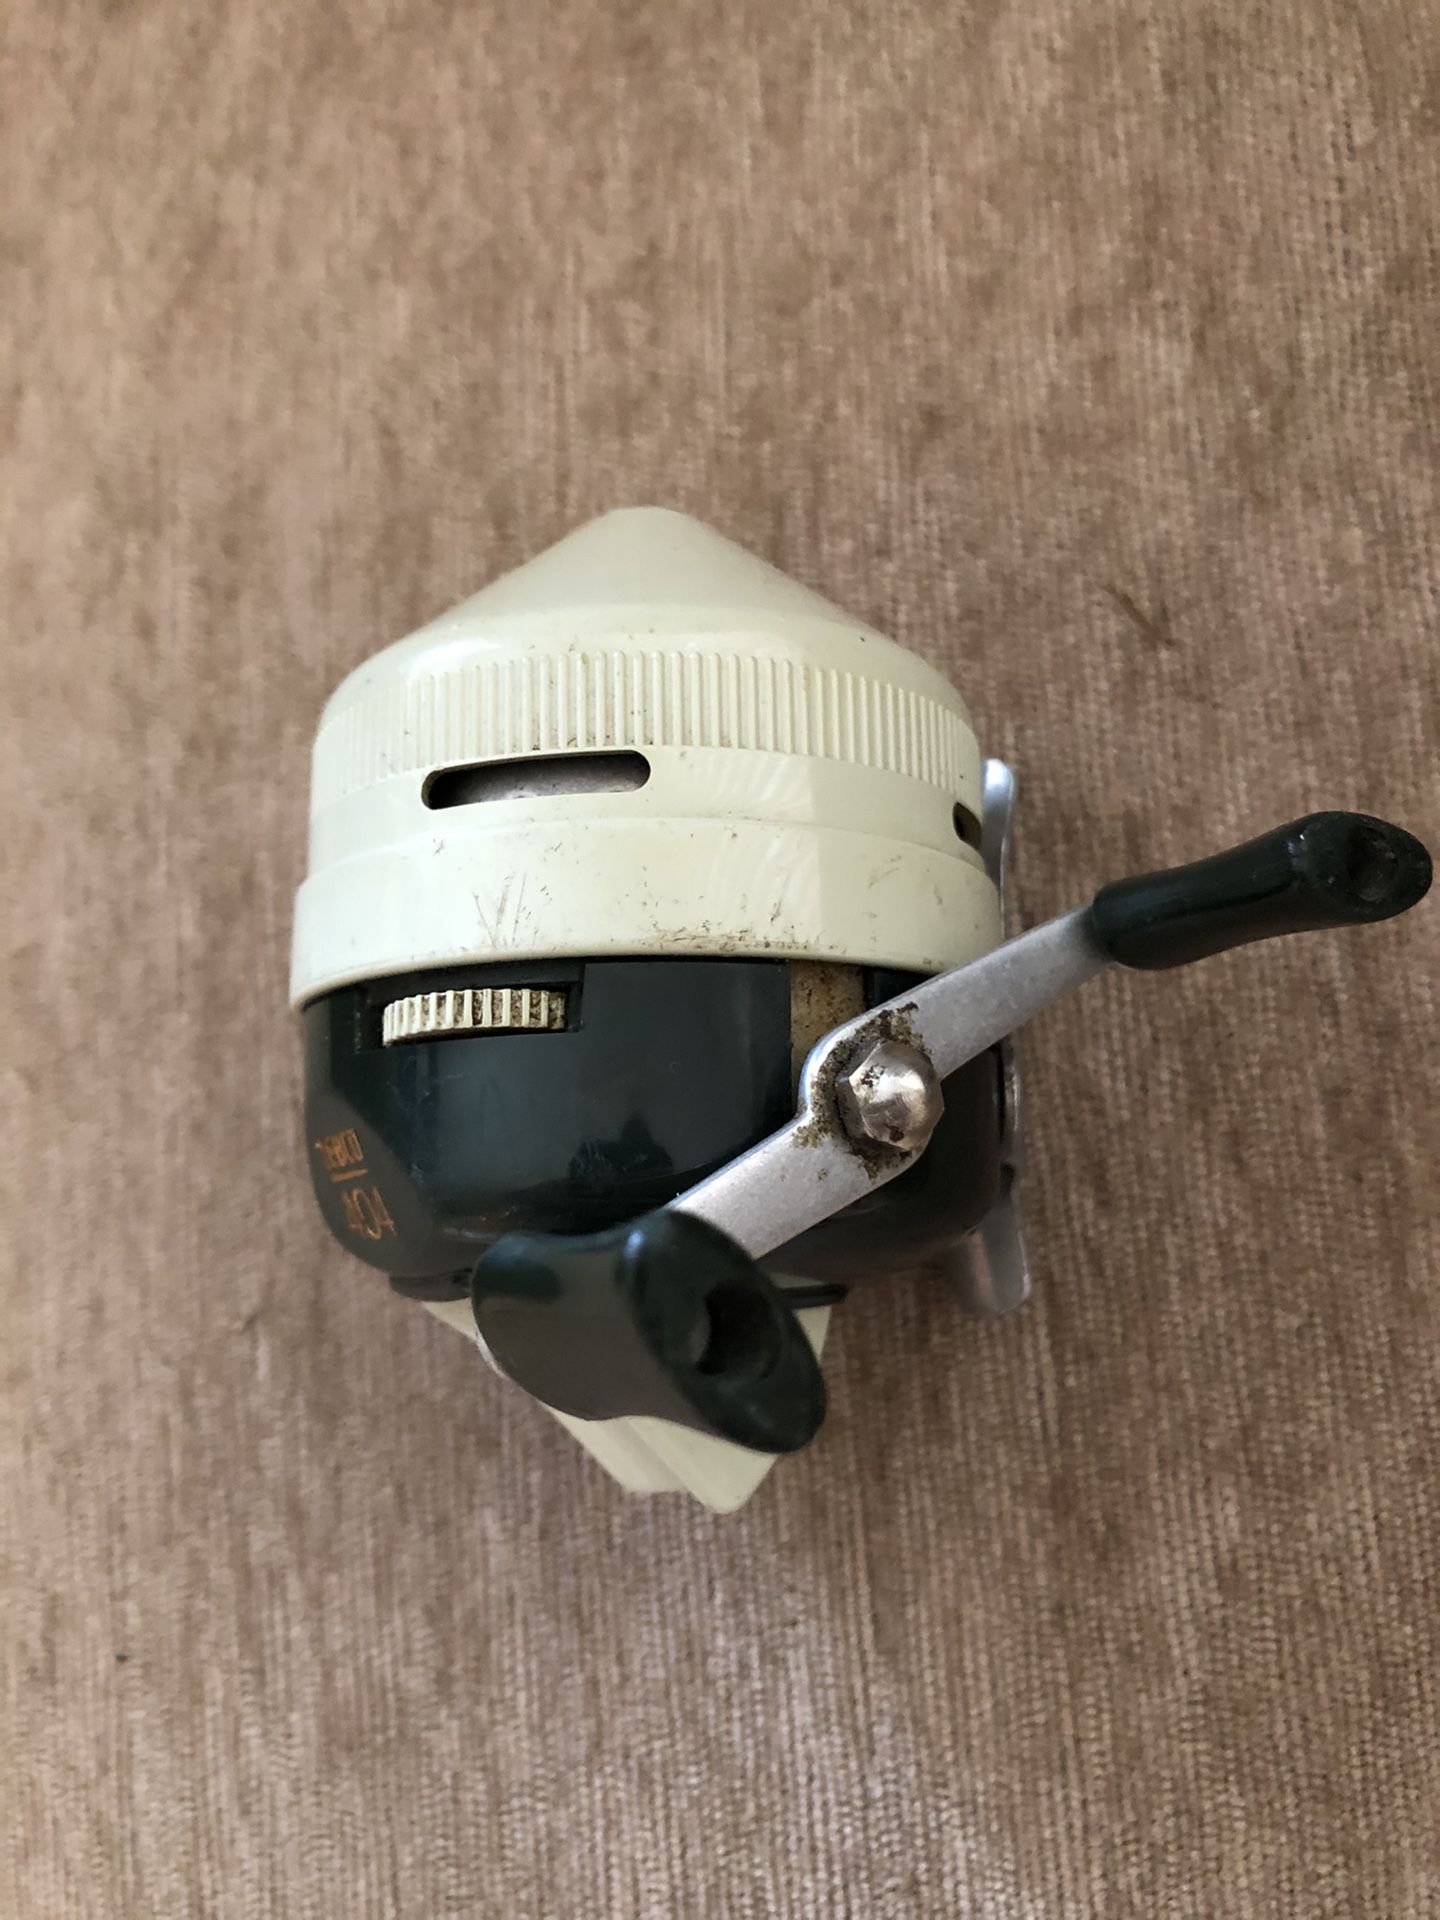 Zebco 404 Fishing Reel Push Button for Sale in Hurricane, WV - OfferUp